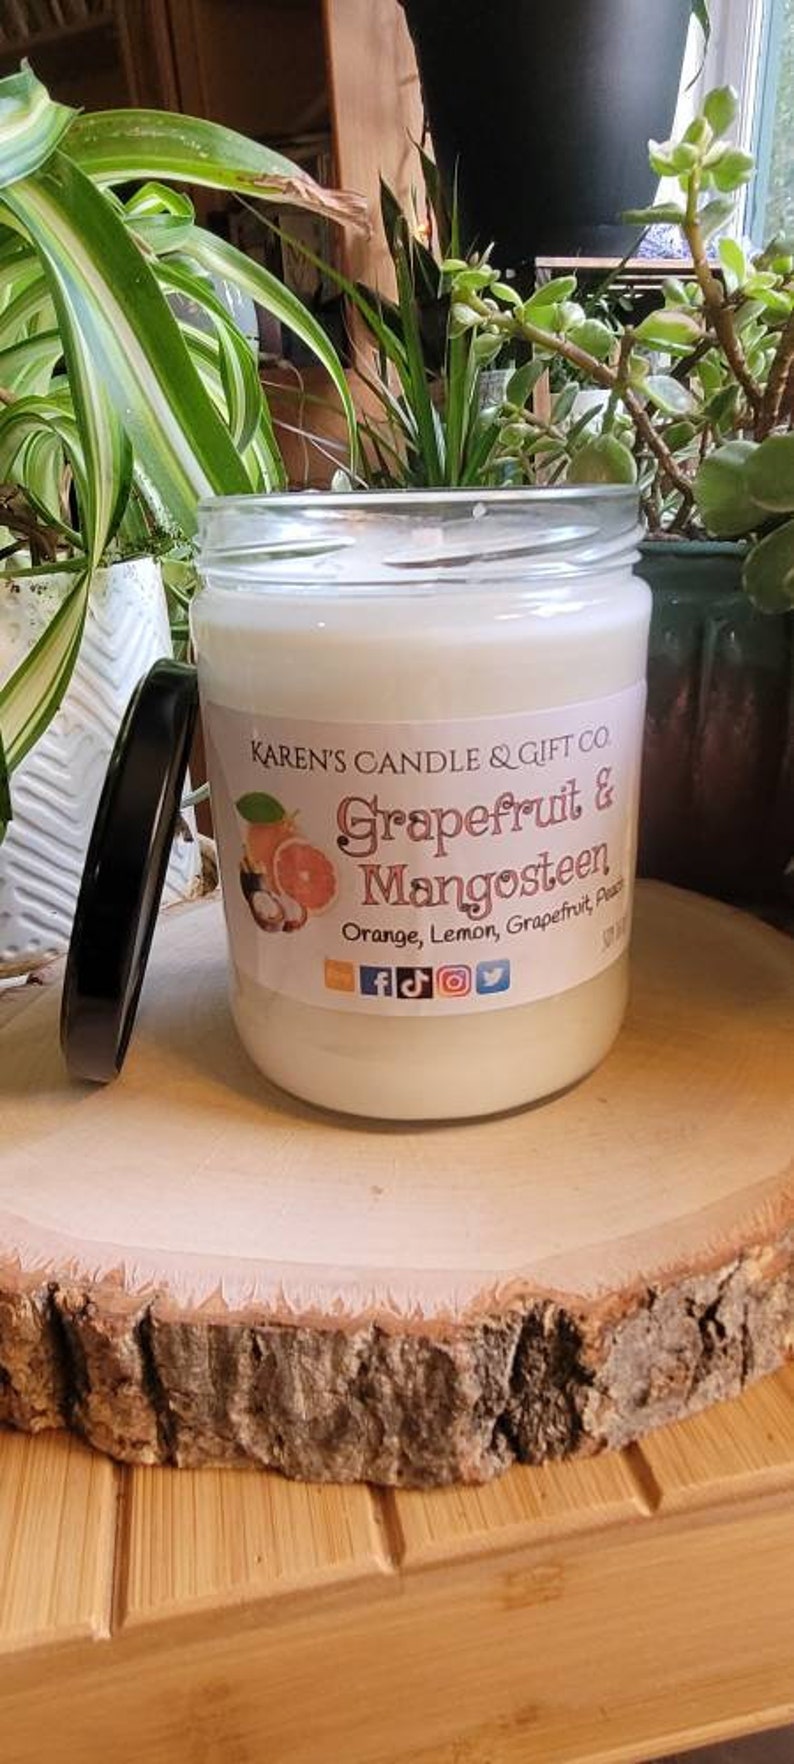 Grapefruit & Mangosteen Soy Candle, 16 oz highly scented, slow burning, glass, eco-friendly, handmade, soy wax, spa, aromatherapy, citrus image 2